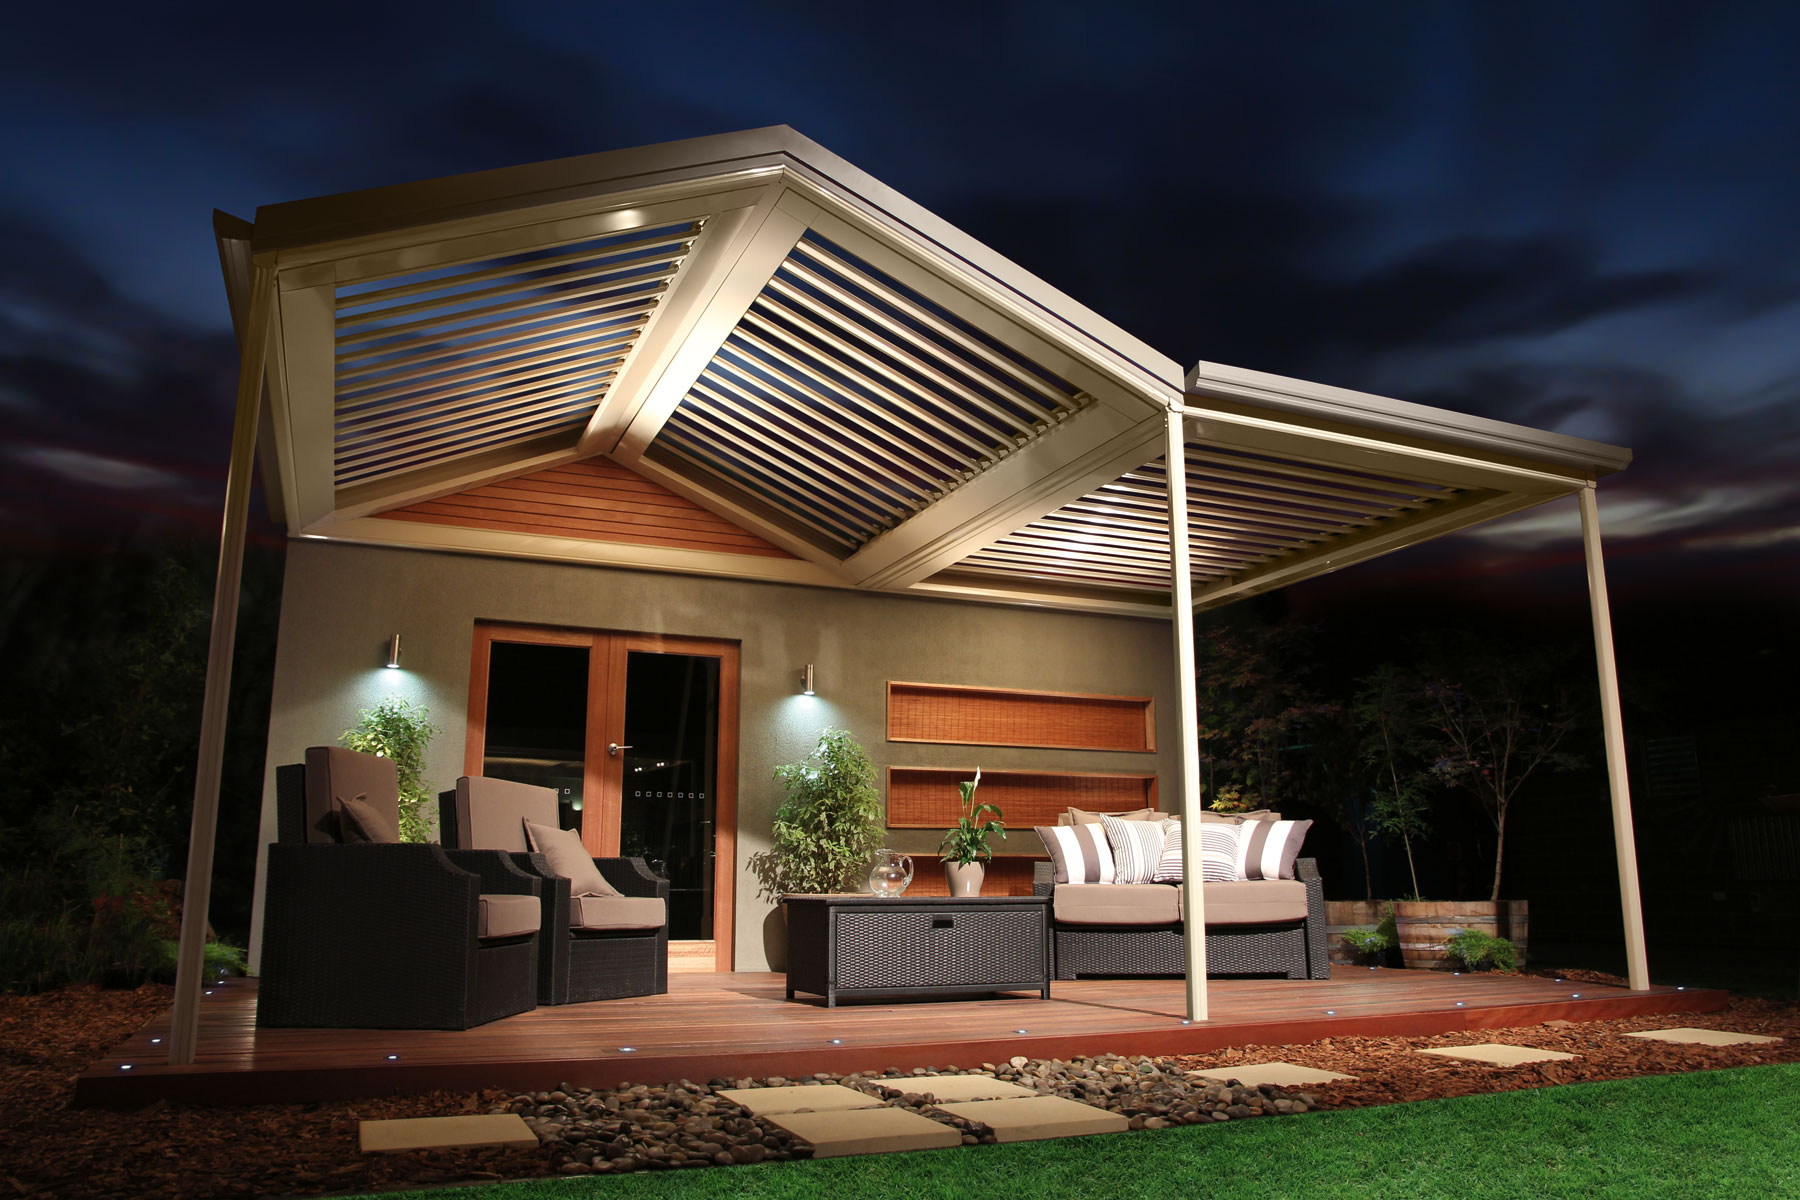 kilsyth, pergola, contact, outdoor, impressions, required, your, call, listen, ability, best, listen, means, need, information, further, Outback Sunroof Louvre